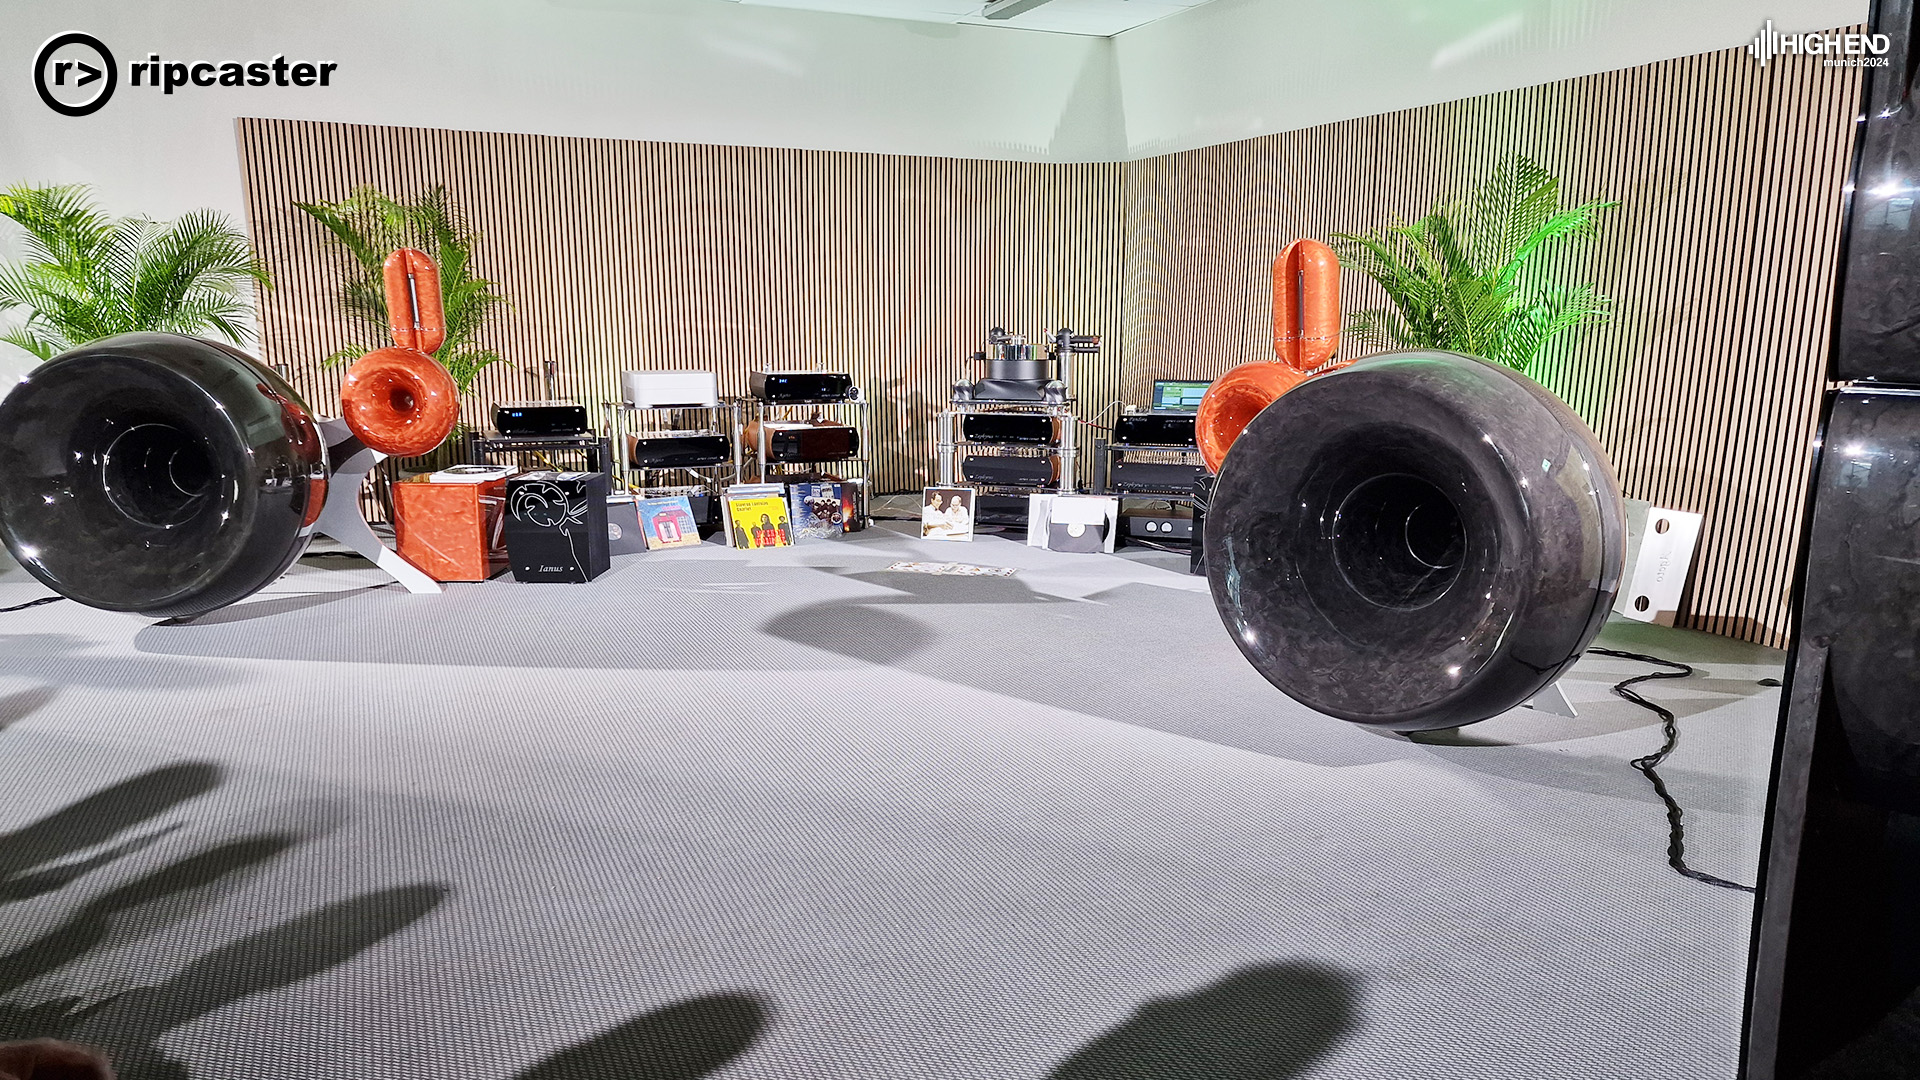 Very large speakers that look like car tyres and other orange speakers that a small car tyres with bit pointing upwards.  There's a lot of other HiFi equipment in the photo